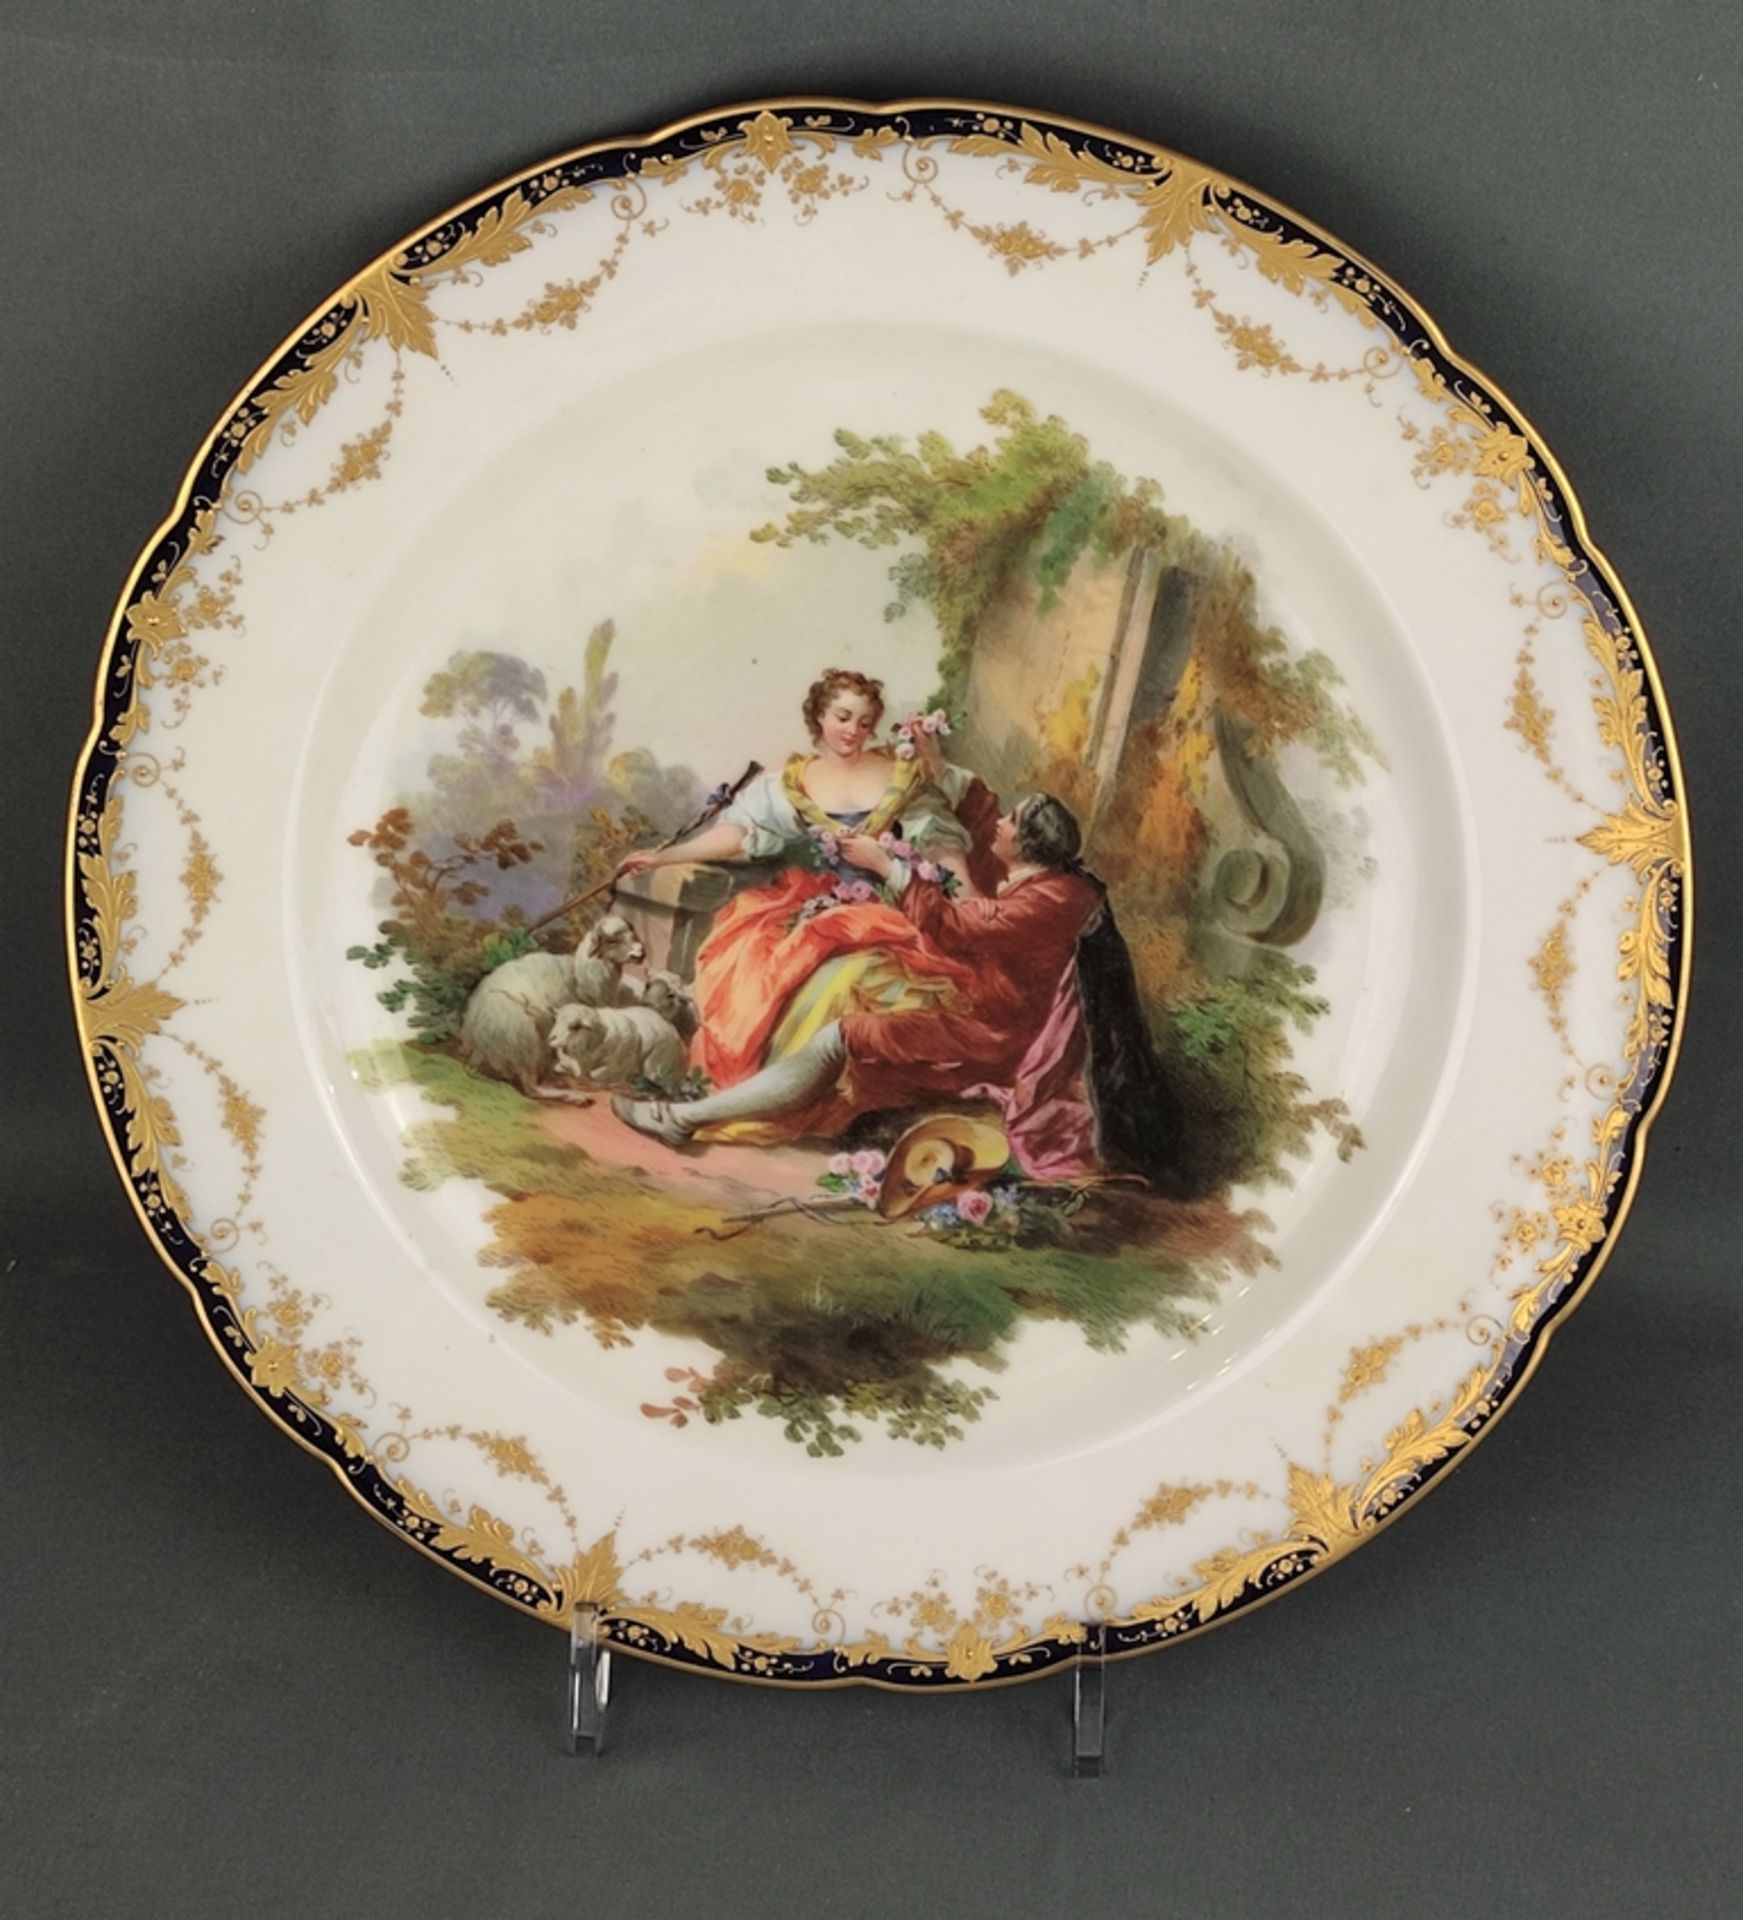 Large plate, centered fine polychrome painting with shepherd scene, couple sitting, each with sheph